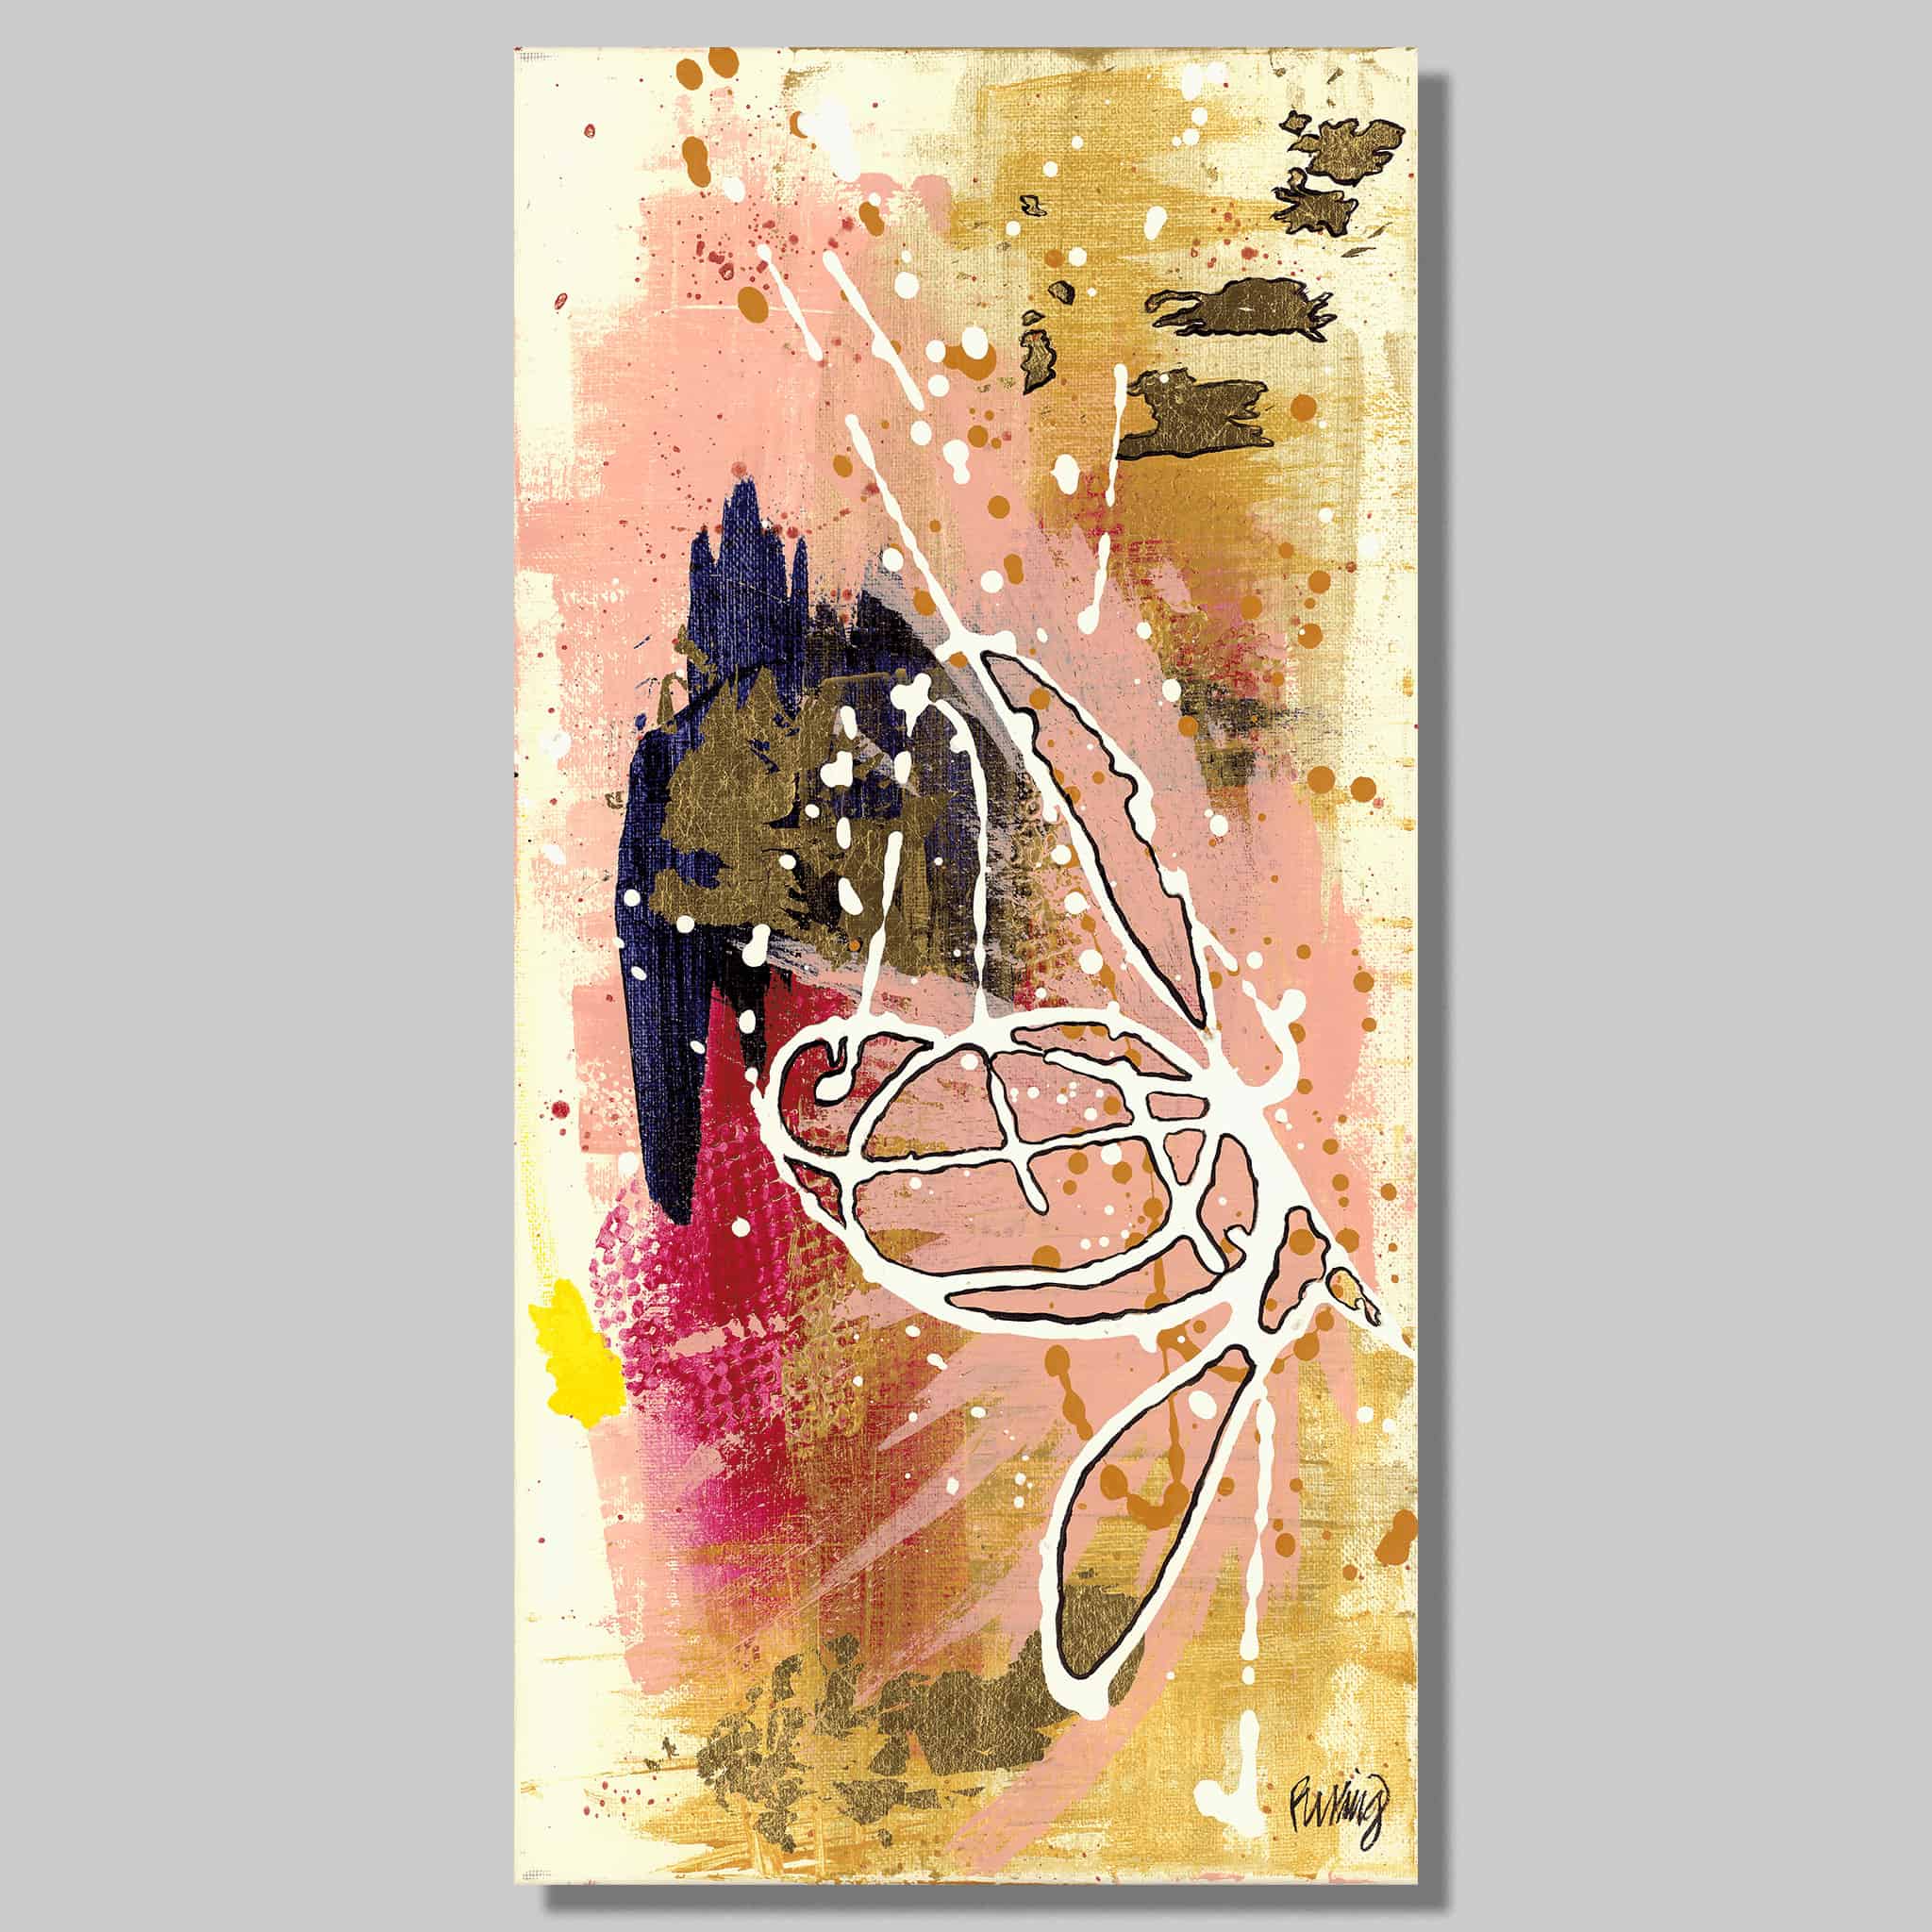 Vertical Abstract II 15″ x 30″ / 20″ x 40″ Giclee On High Gloss MetalBy: Patty King